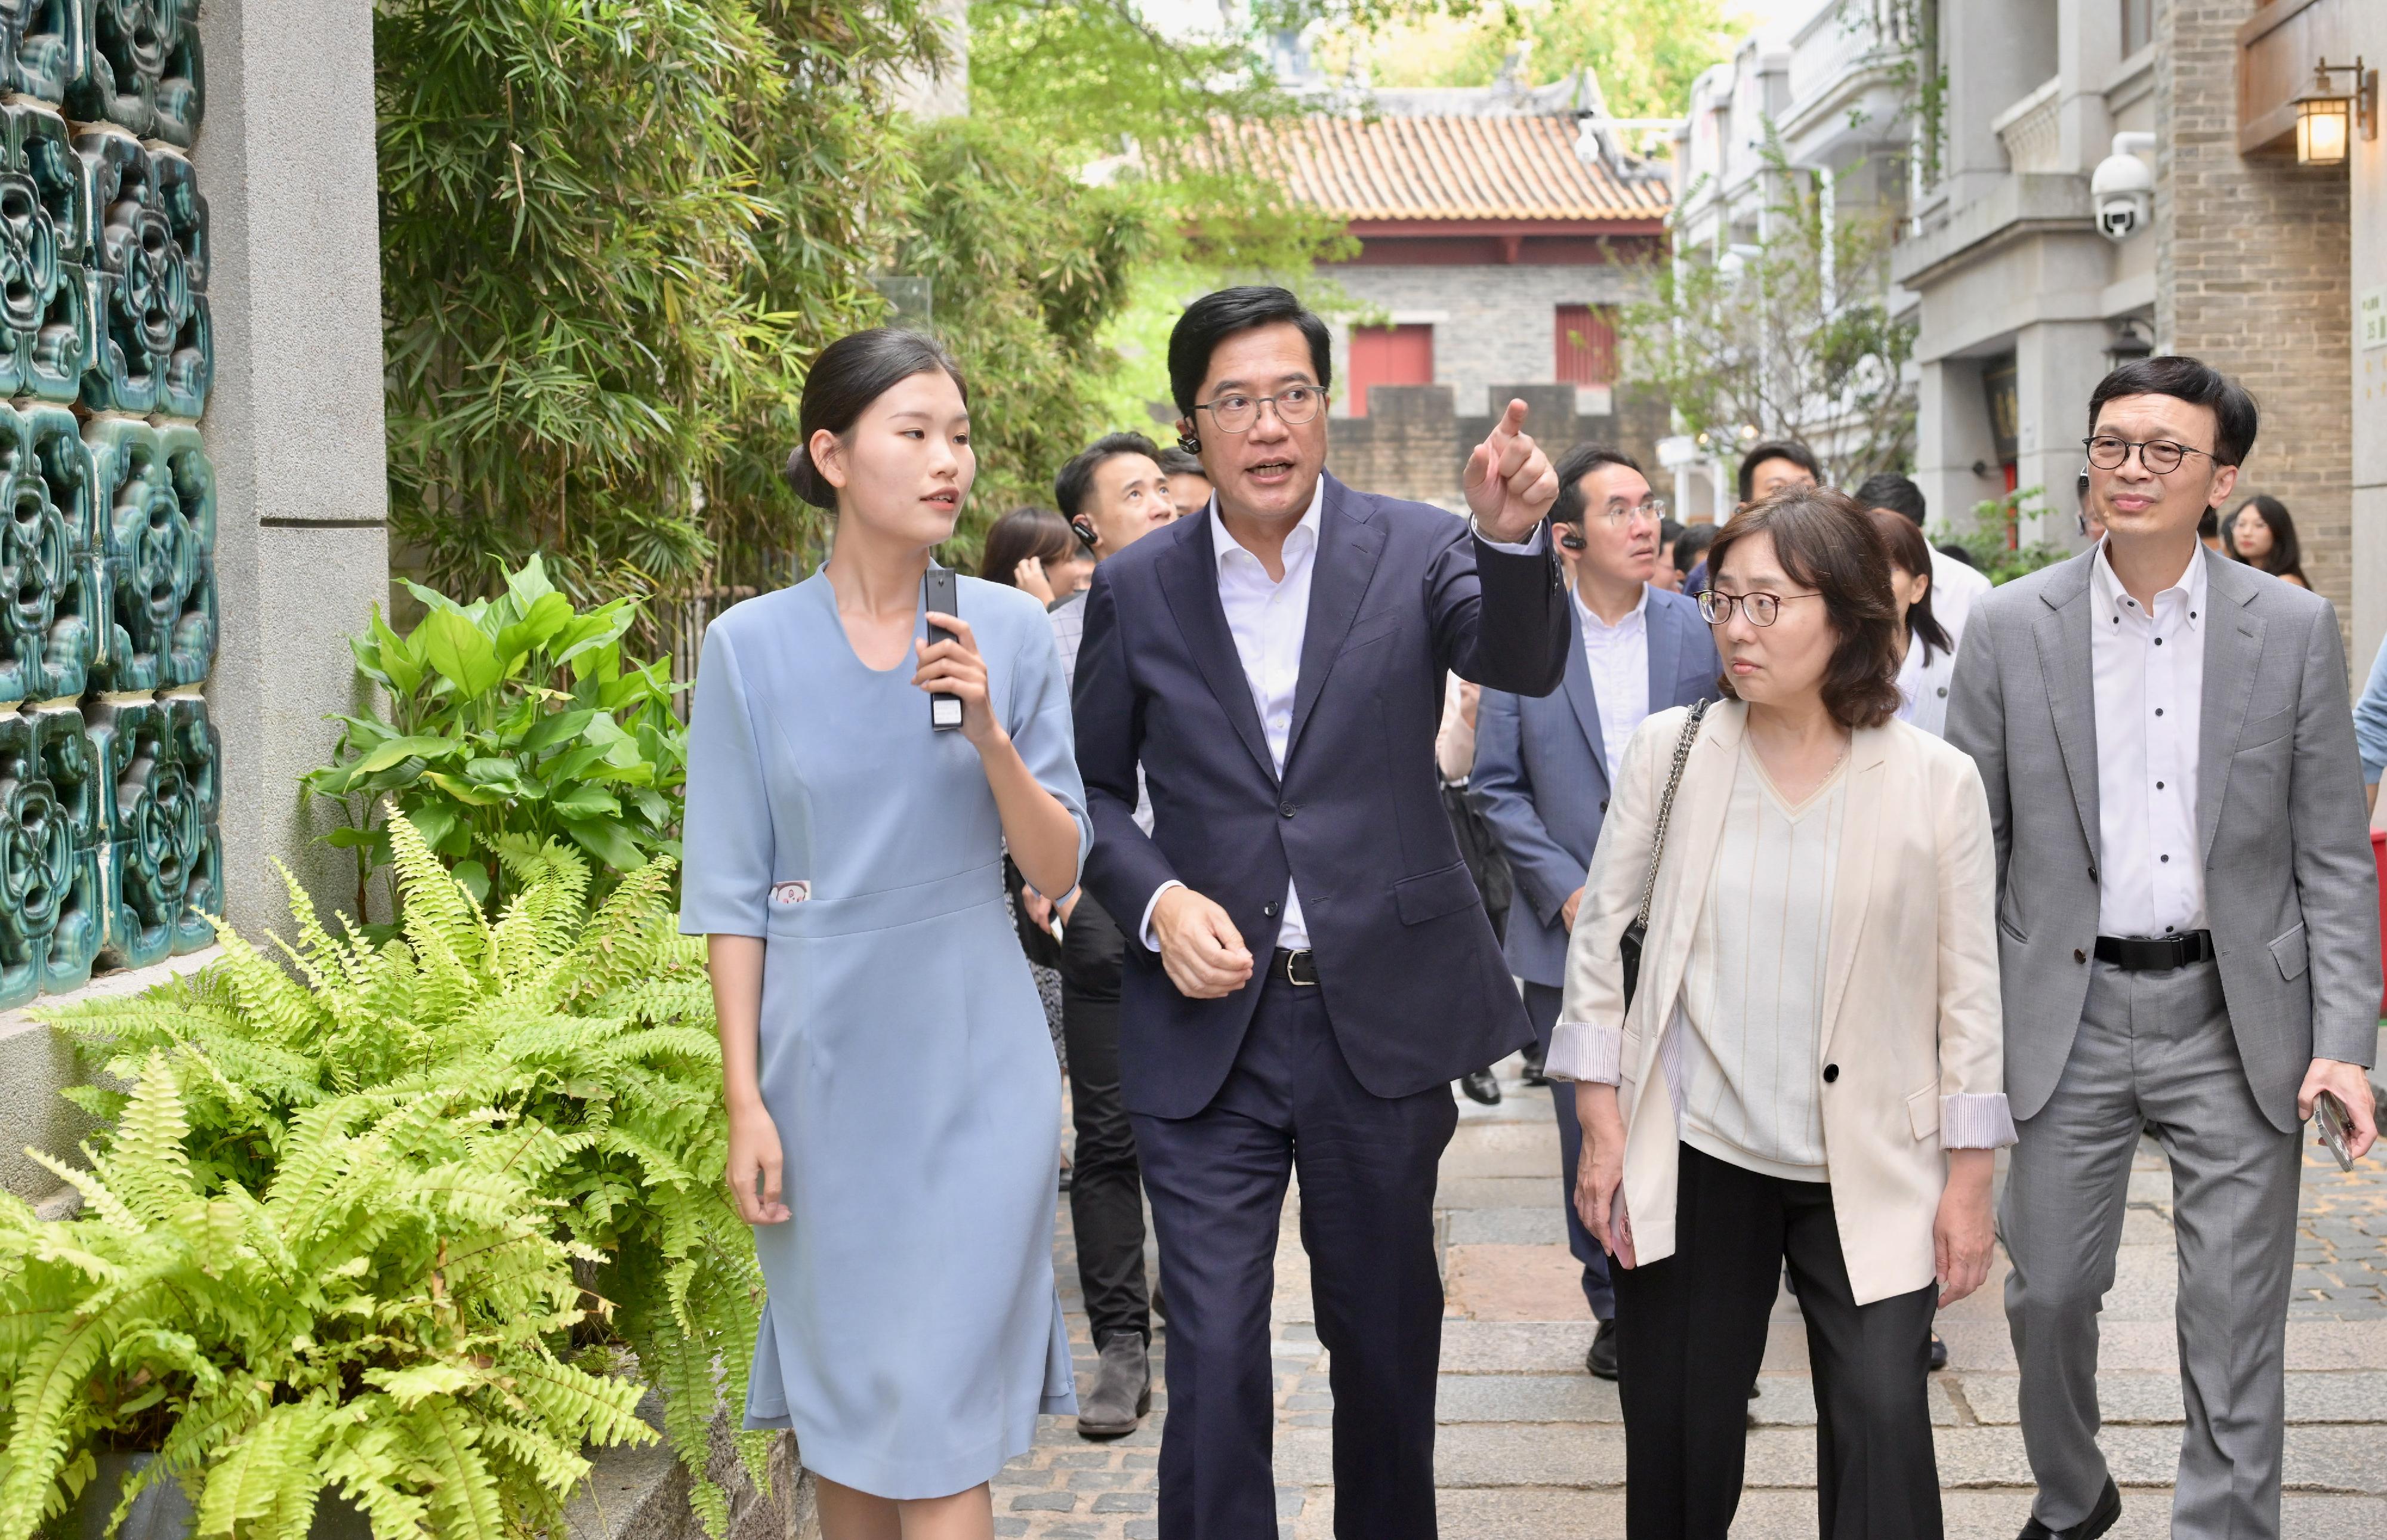 The delegation of the HKSAR Government visited Nanshan Nantou Ancient Town after the meeting of the Task Force for Collaboration on the Northern Metropolis Development Strategy today (October 11) and were briefed by representatives of the Shenzhen Municipal Government on their work on heritage conservation.
